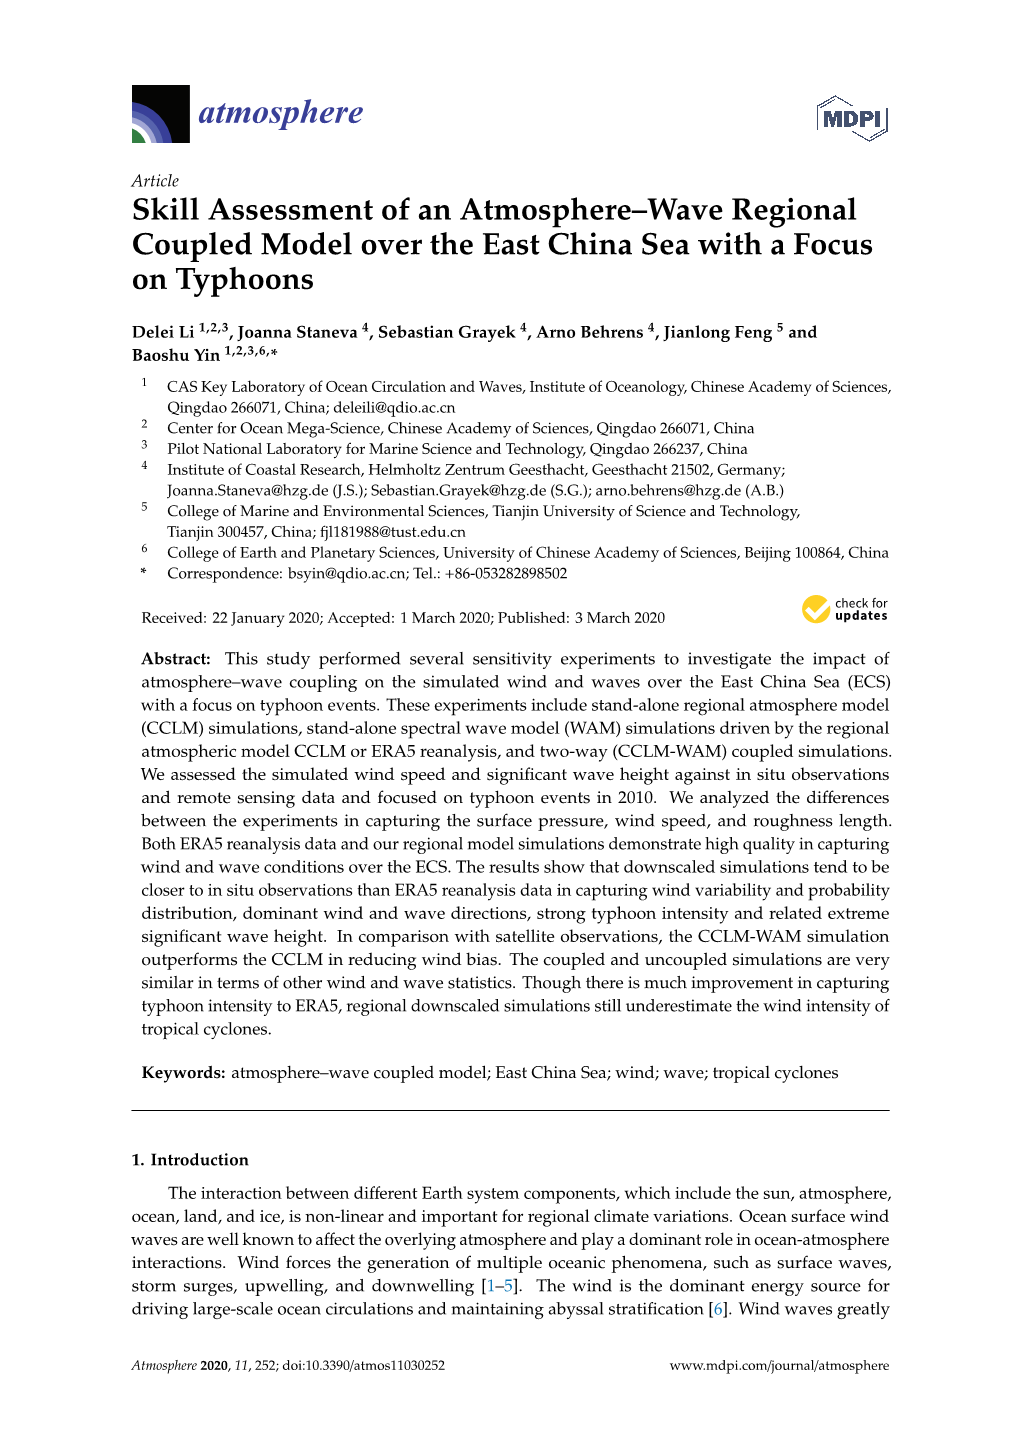 Skill Assessment of an Atmosphere–Wave Regional Coupled Model Over the East China Sea with a Focus on Typhoons